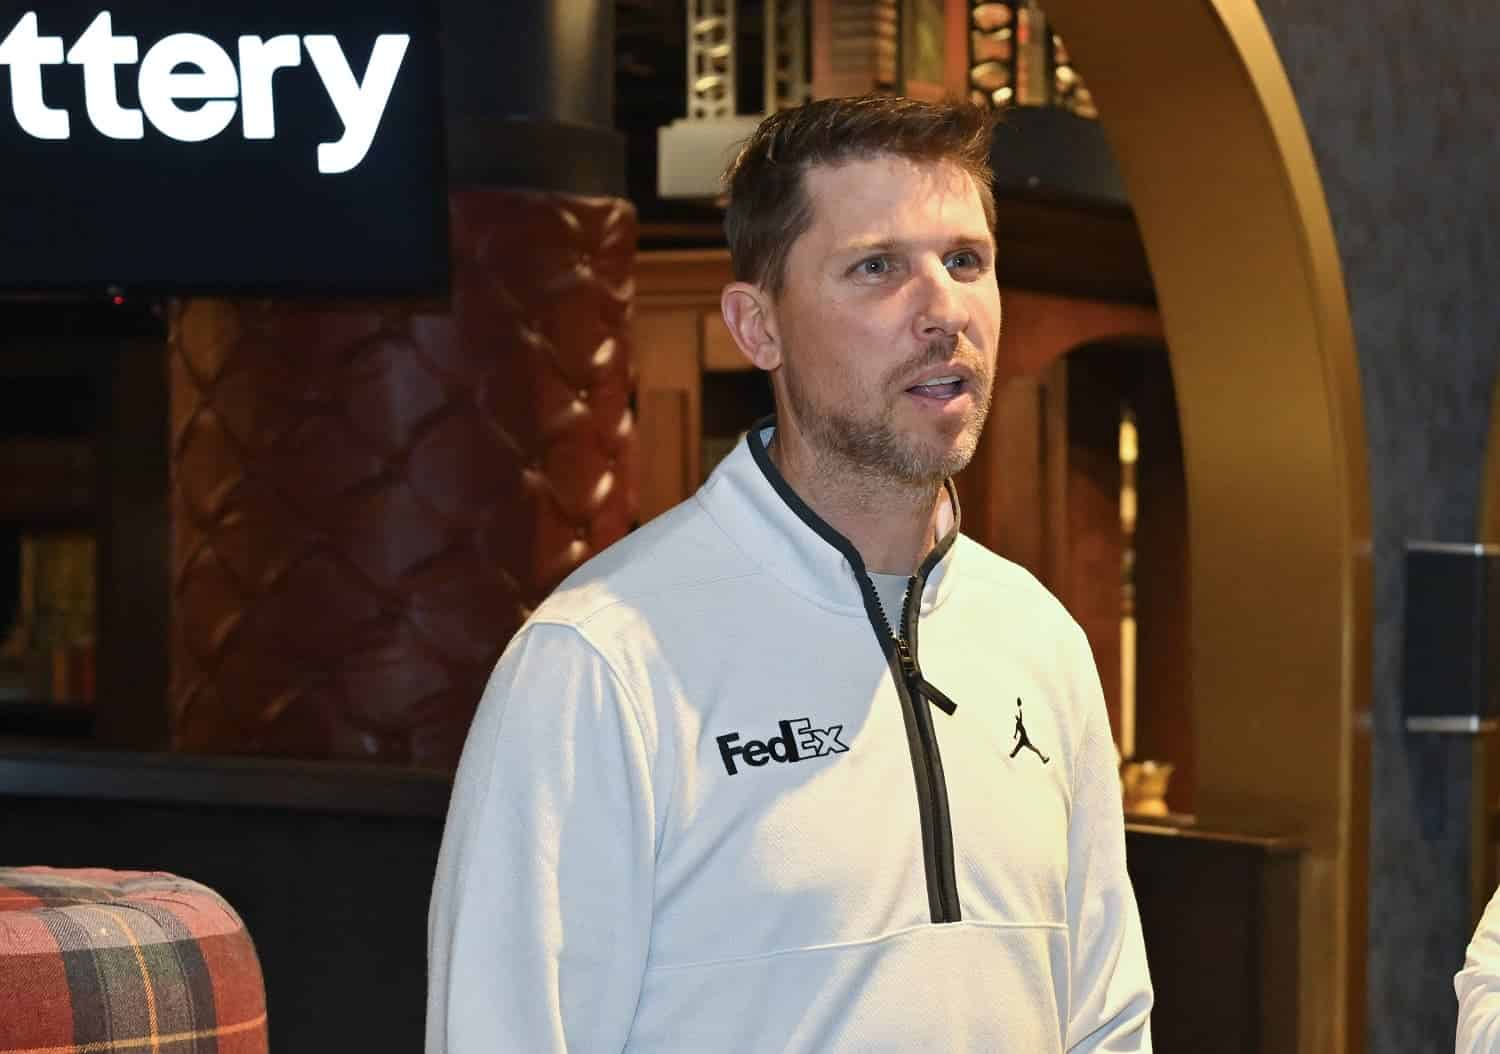 NASCAR driver Denny Hamlin during an appearance with PGA Tour star Rory McIlroy on May 2, 2023 in Charlotte, North Carolina. | Ben Jared/PGA Tour via Getty Images